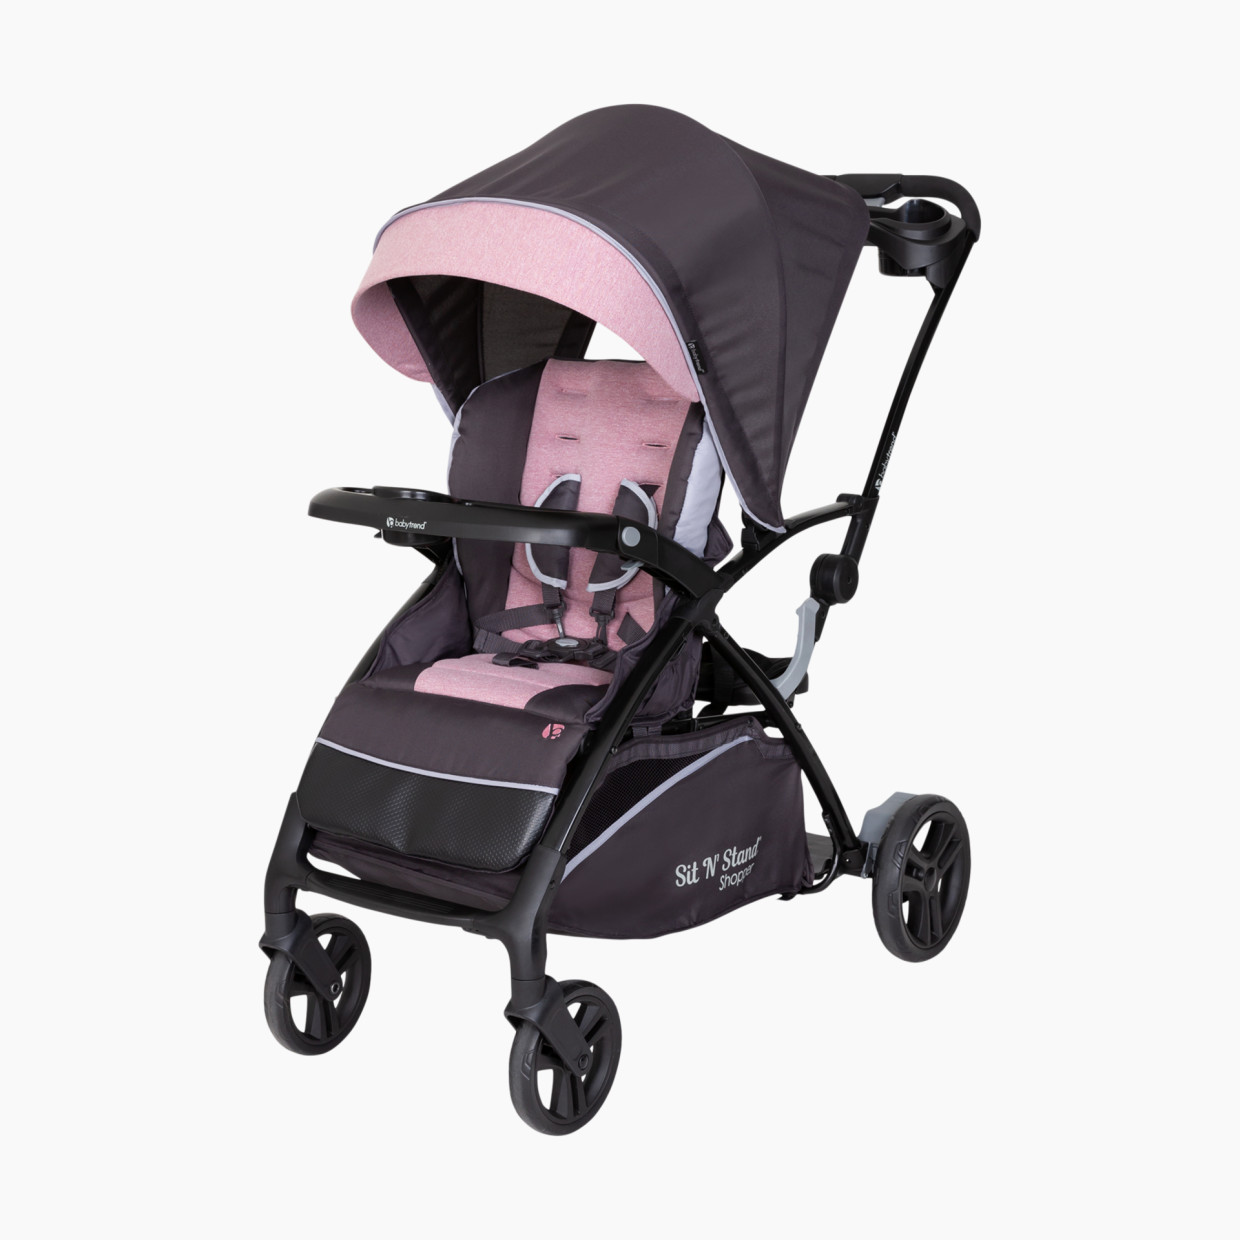 Baby Trend Sit N Stand 5-in-1 Shopper Stroller - Cassis.